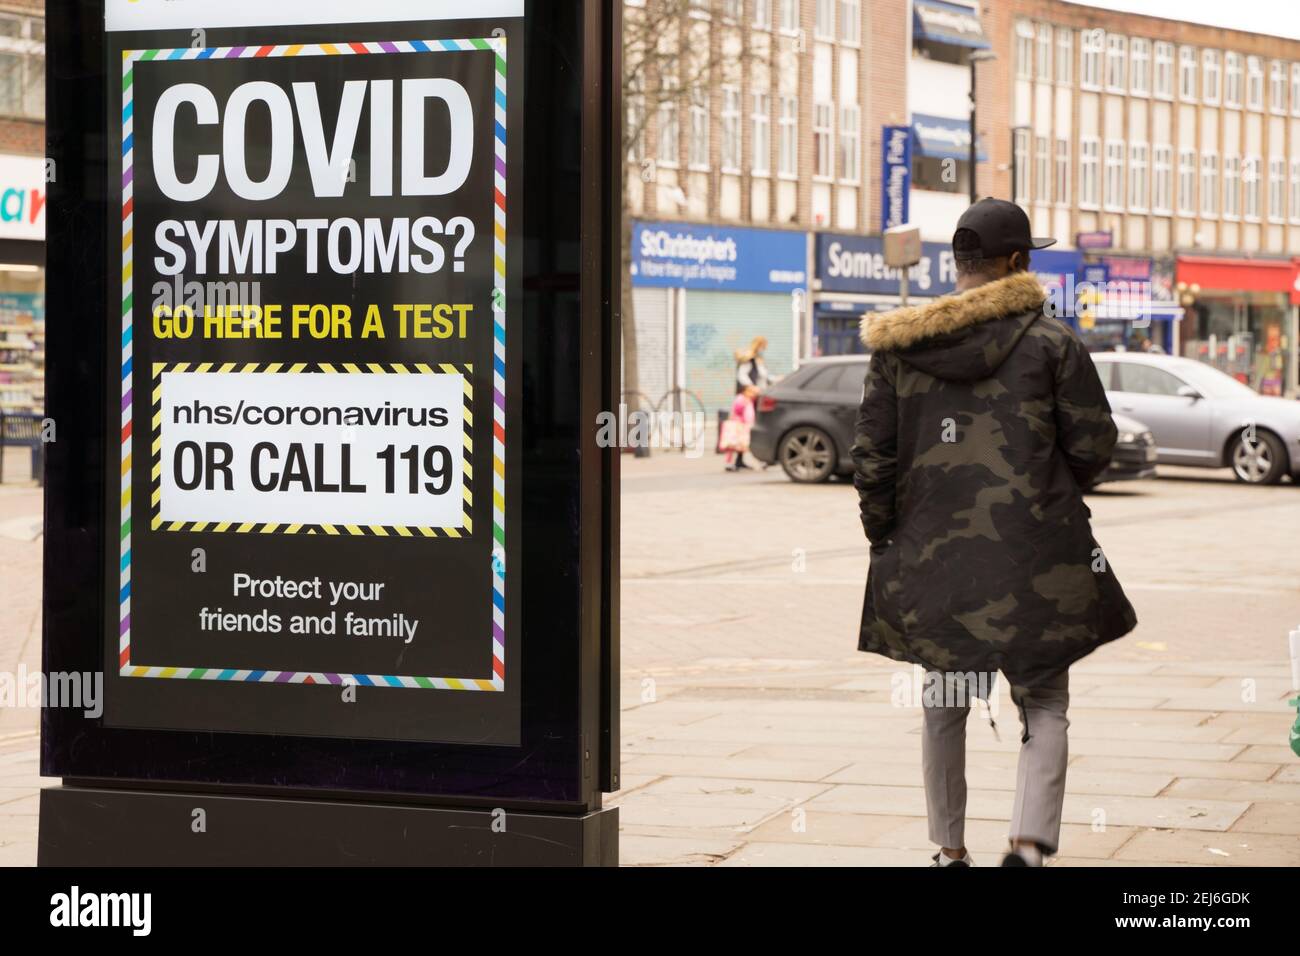 Covid symptoms sign display on LED screen on high street, London Stock Photo